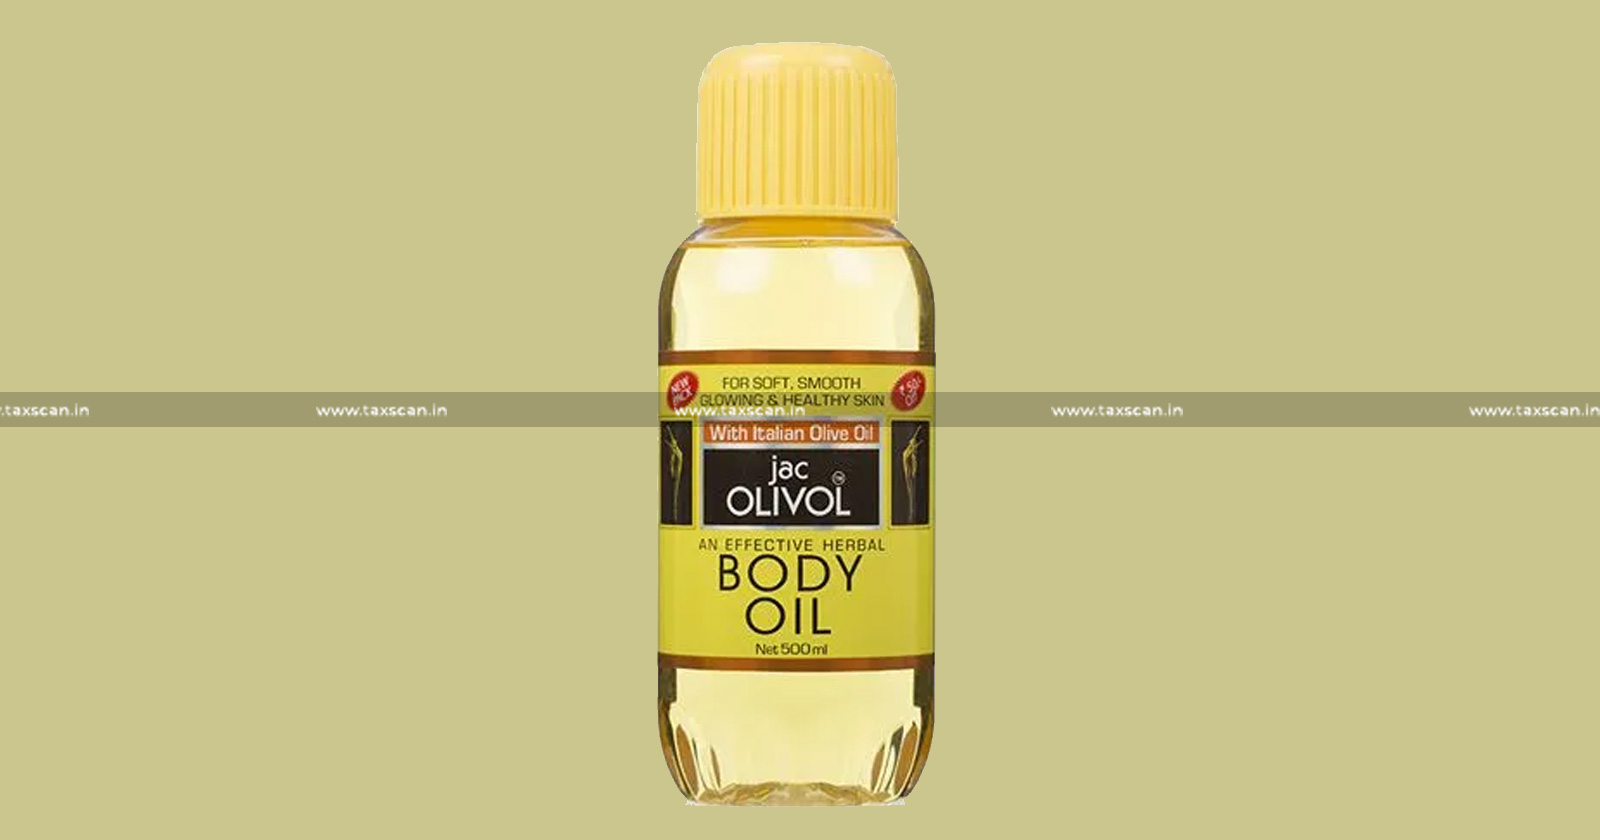 Jac Olivol Body Oil - Medicament - Cosmetic Product - Primary Function - GST - AAR - taxscan